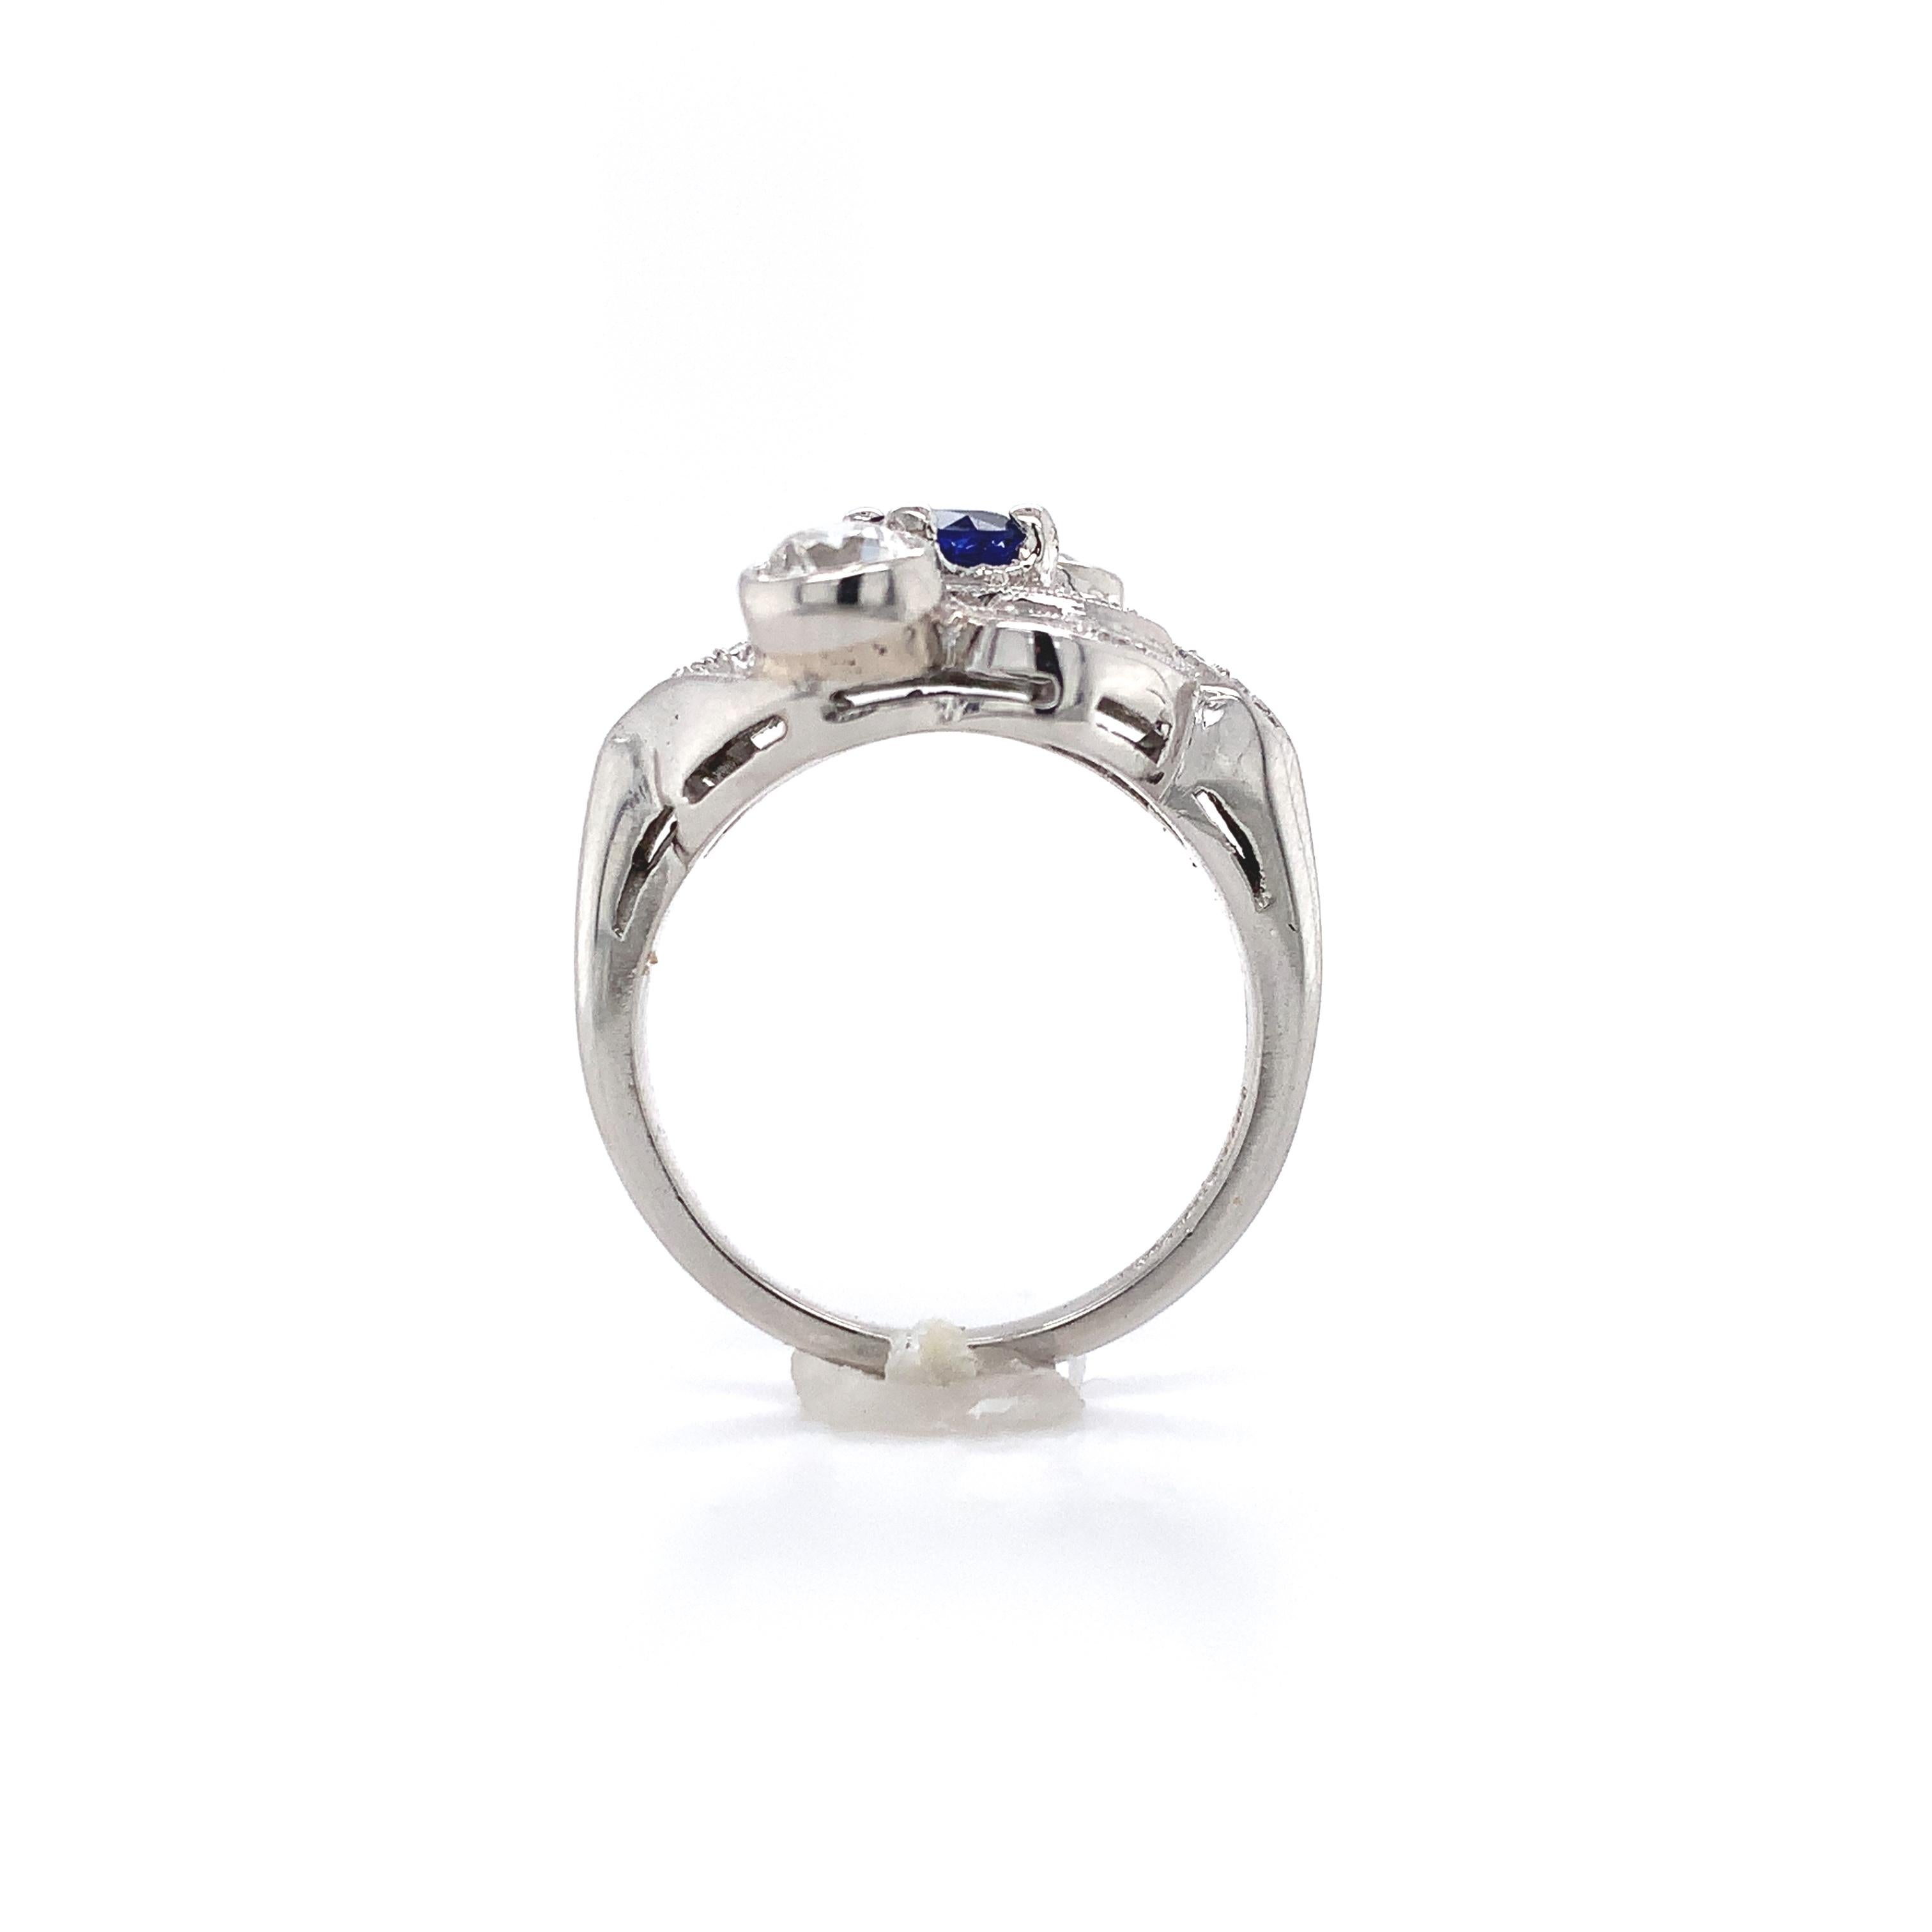 Antique platinum ring featuring a royal blue sapphire and 2 larger European cut diamonds. The sapphire weighs .54cts and measures about 4.8mm. The 2 European cut diamonds are bezel set and measure about 4.3mm. They weigh about .45ct each and have